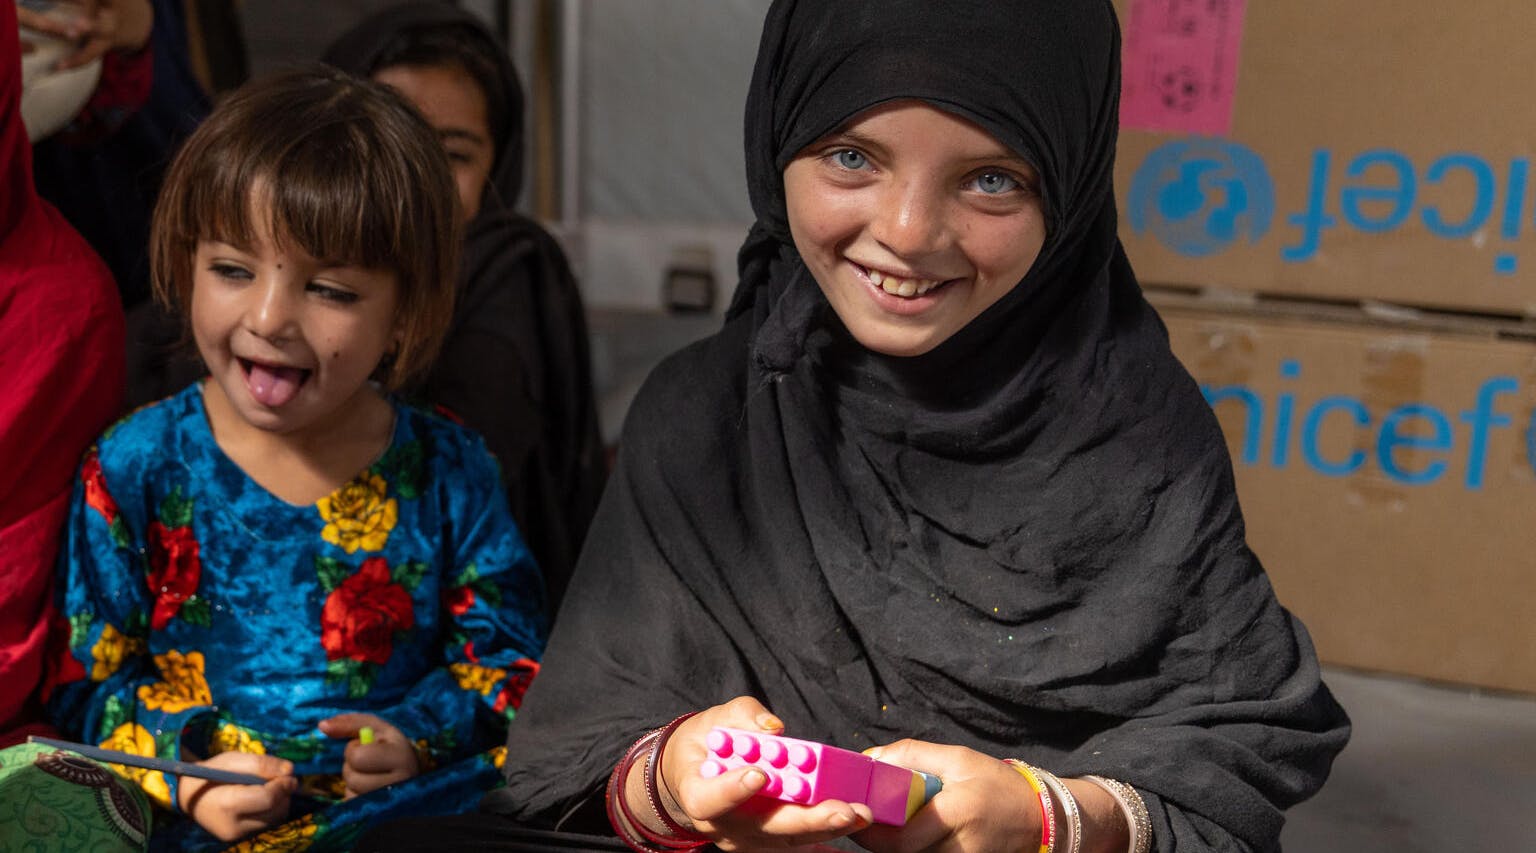 Afghanistan Emergency, Naghma, 7, plays with toys inside the child-friendly space where she attends daily with her friends.